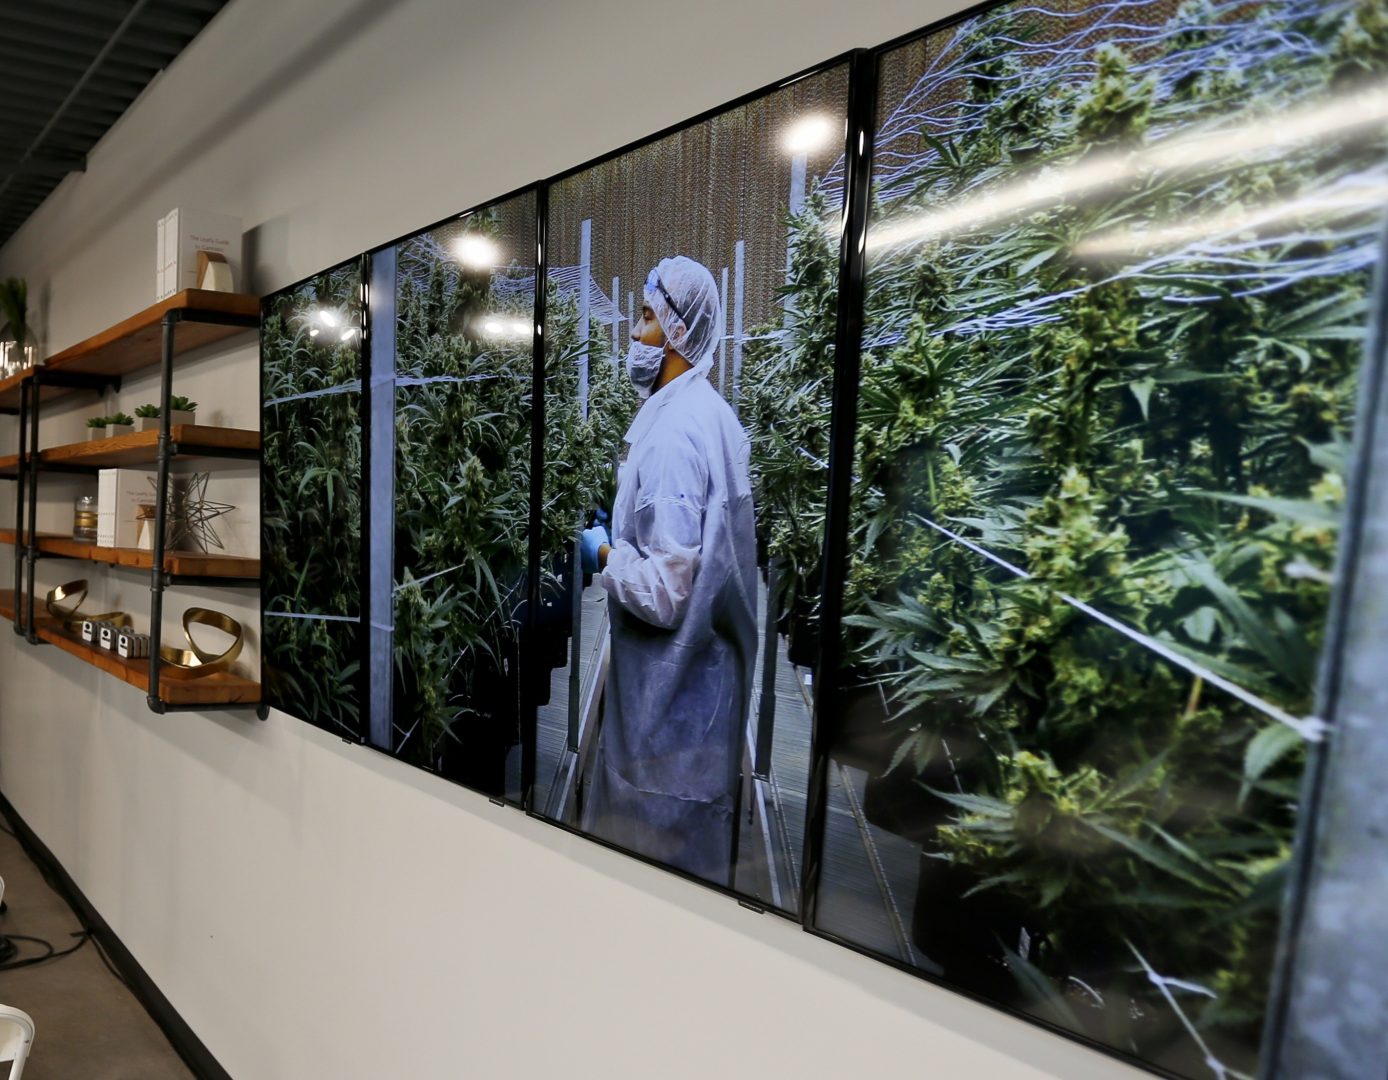 FILE PHOTO: Photographs of marijuana plants are on the wall beside shelves of product displays during an open house and media availability for the opening of CY+ Medical marijuana Dispensary, Thursday, Feb. 1, 2018 in Butler, Pa.